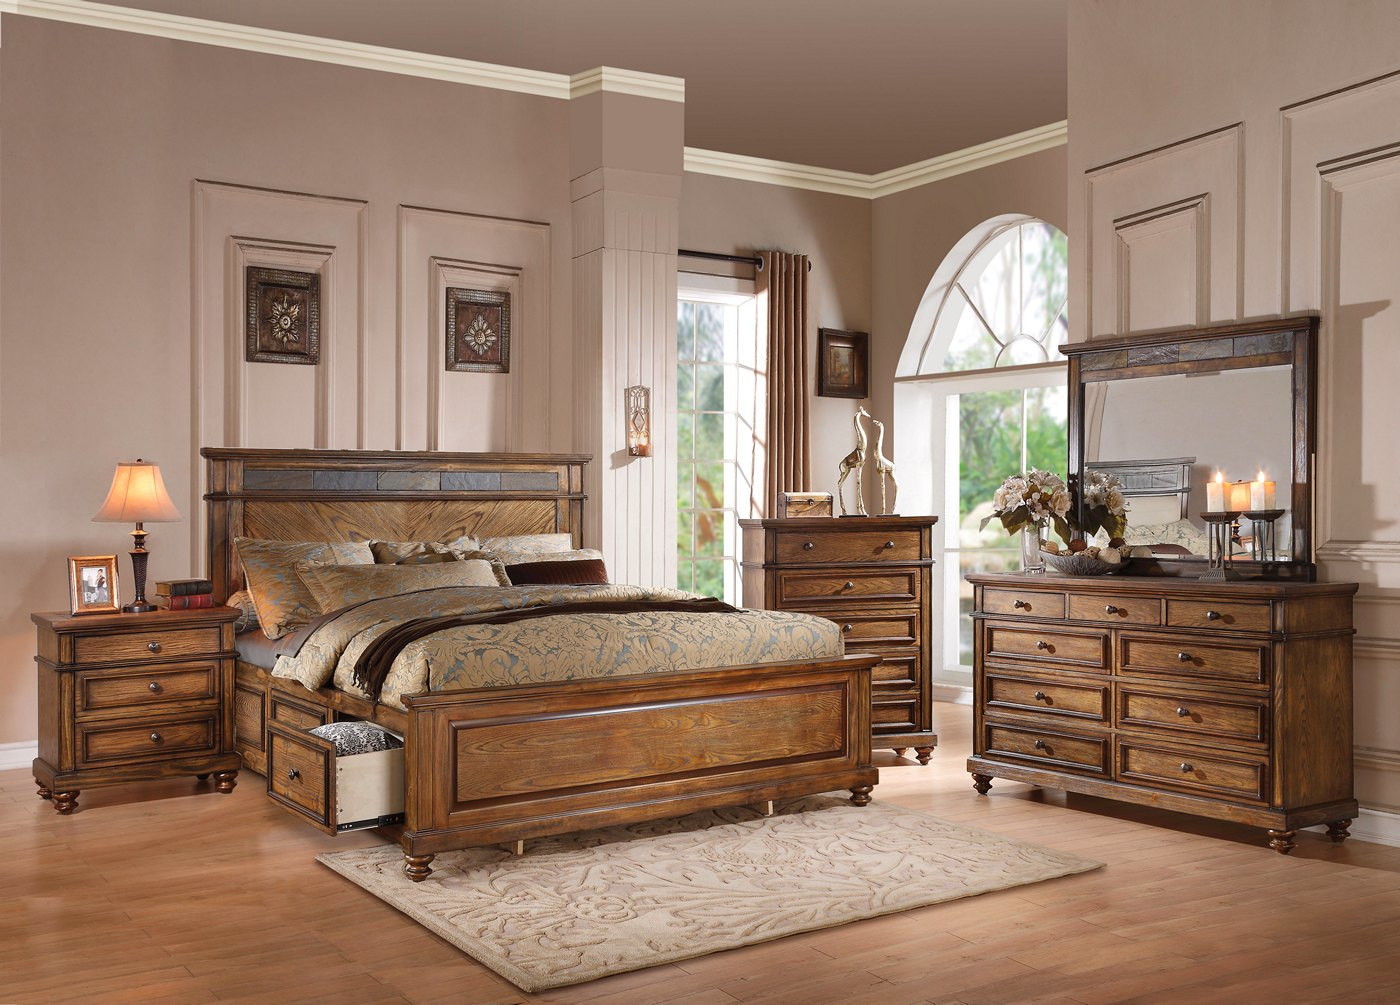 Rustic King Bedroom Set
 Abilene Rustic 4 pc King Storage Bed Set with Stone Accent